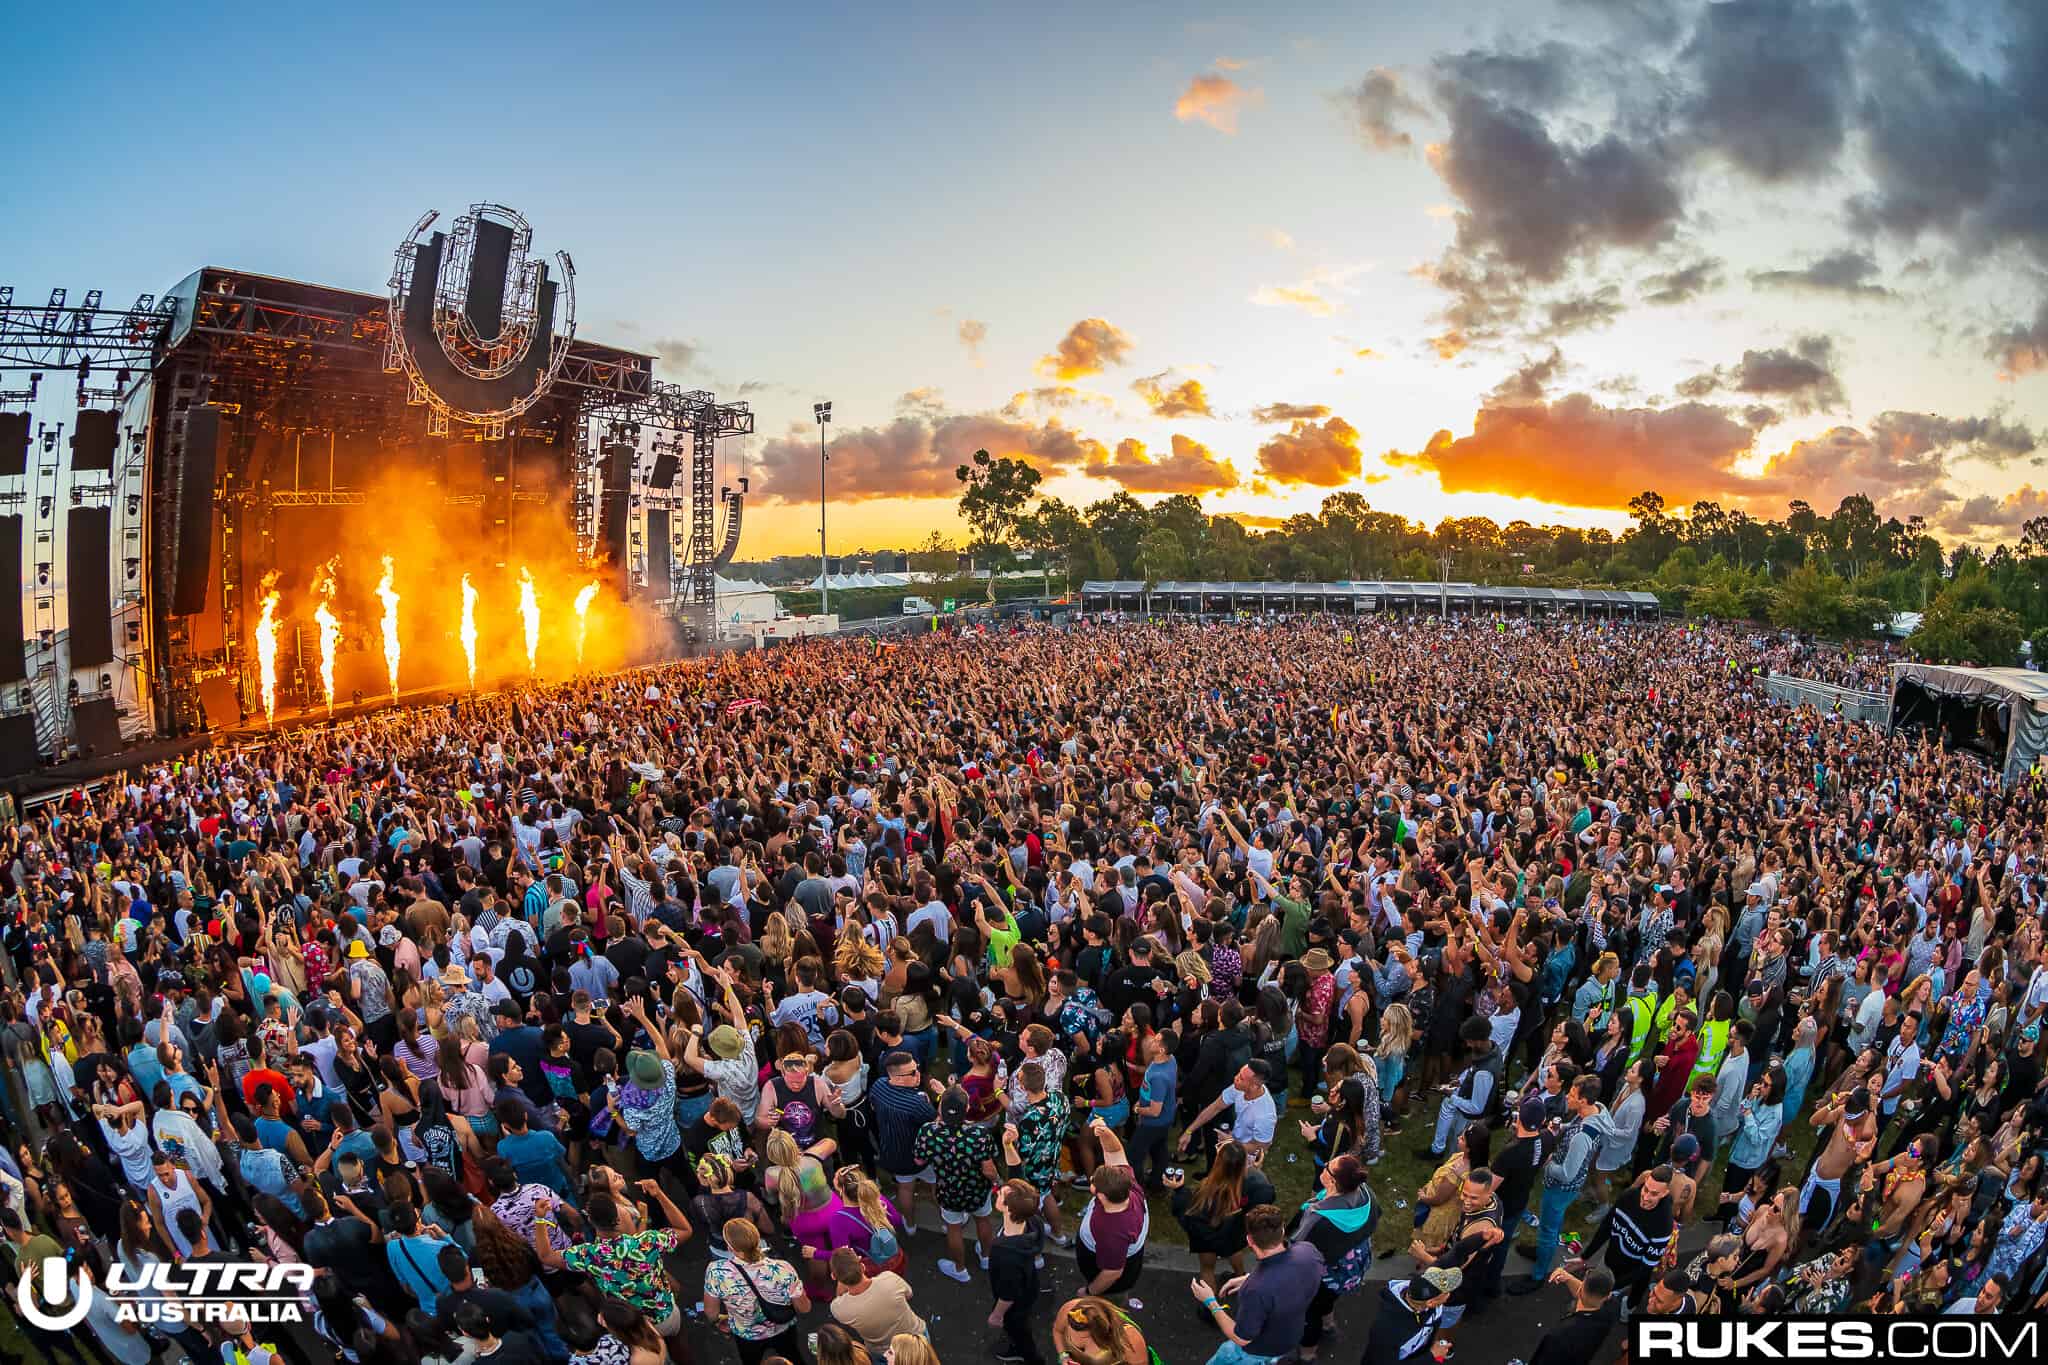 Ultra Australia locked in for its third edition in 2022, lineup to follow shortly